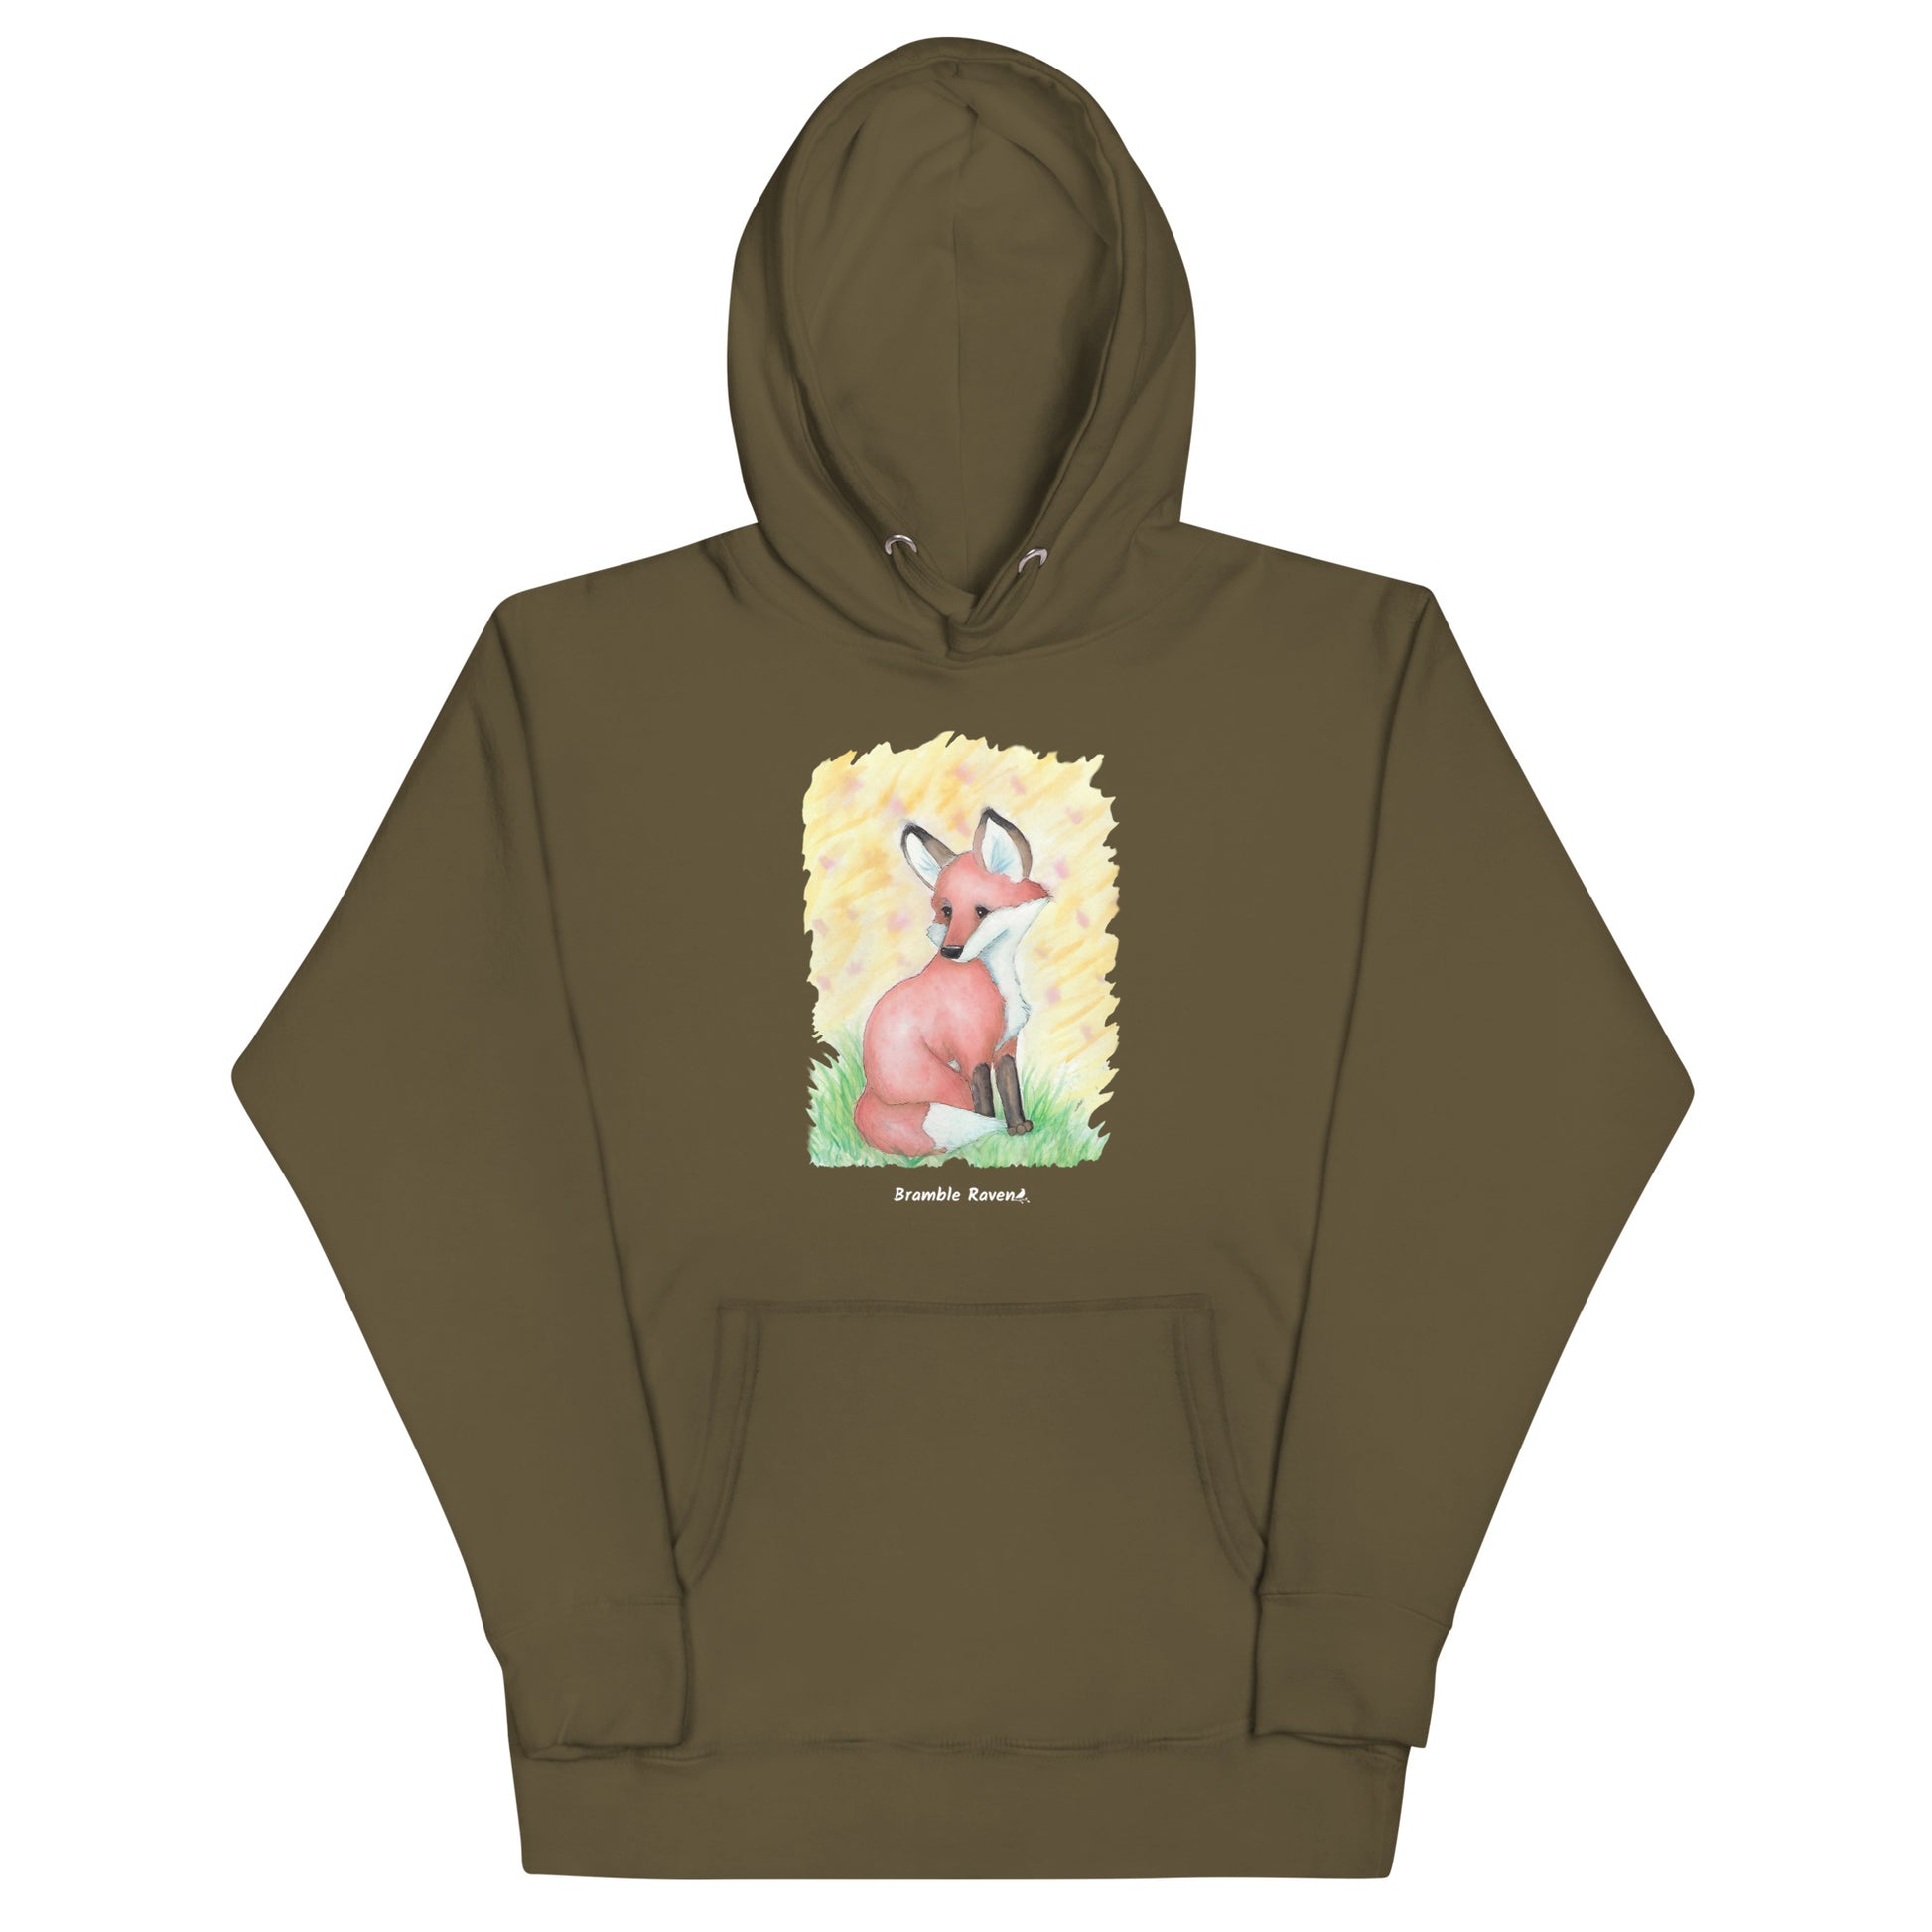 Unisex military green colored hoodie. Features original watercolor painting of a fox in the grass against a yellow backdrop.